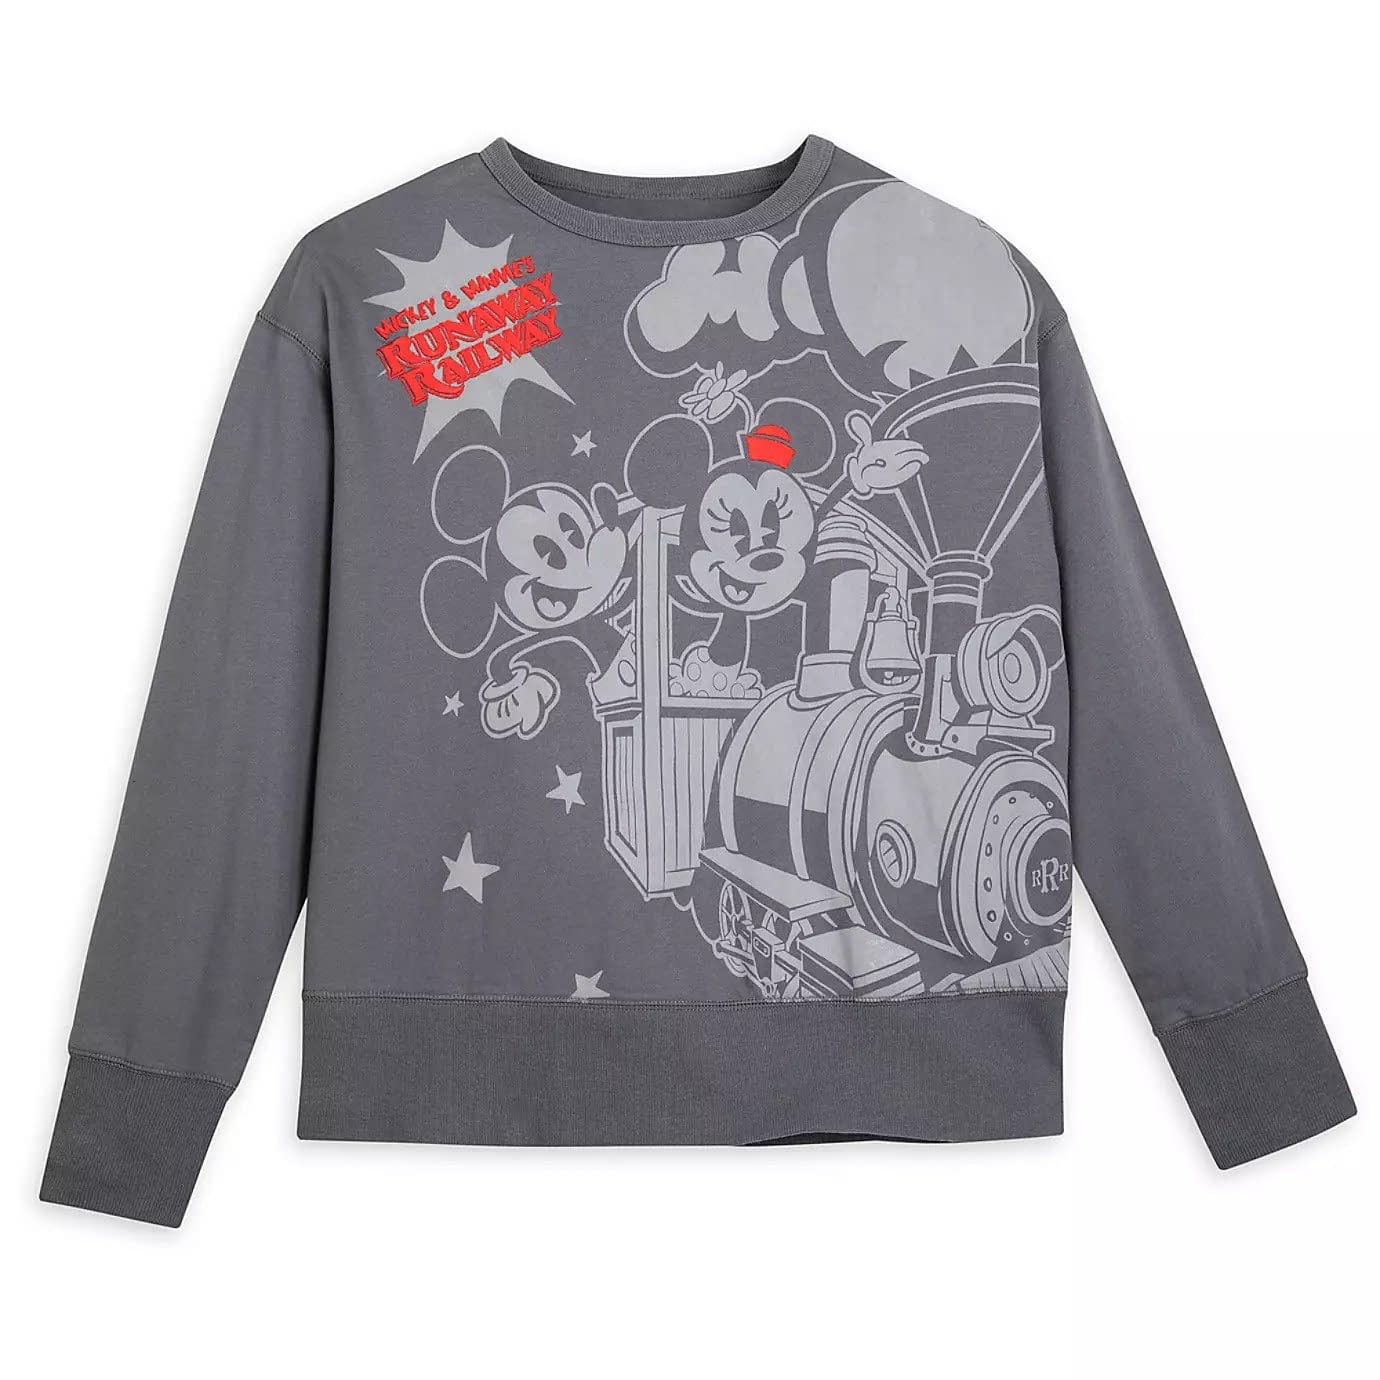 5 Must Have Items to Celebrate Mickey and Minnie's Runaway Railway in Walt Disney World!